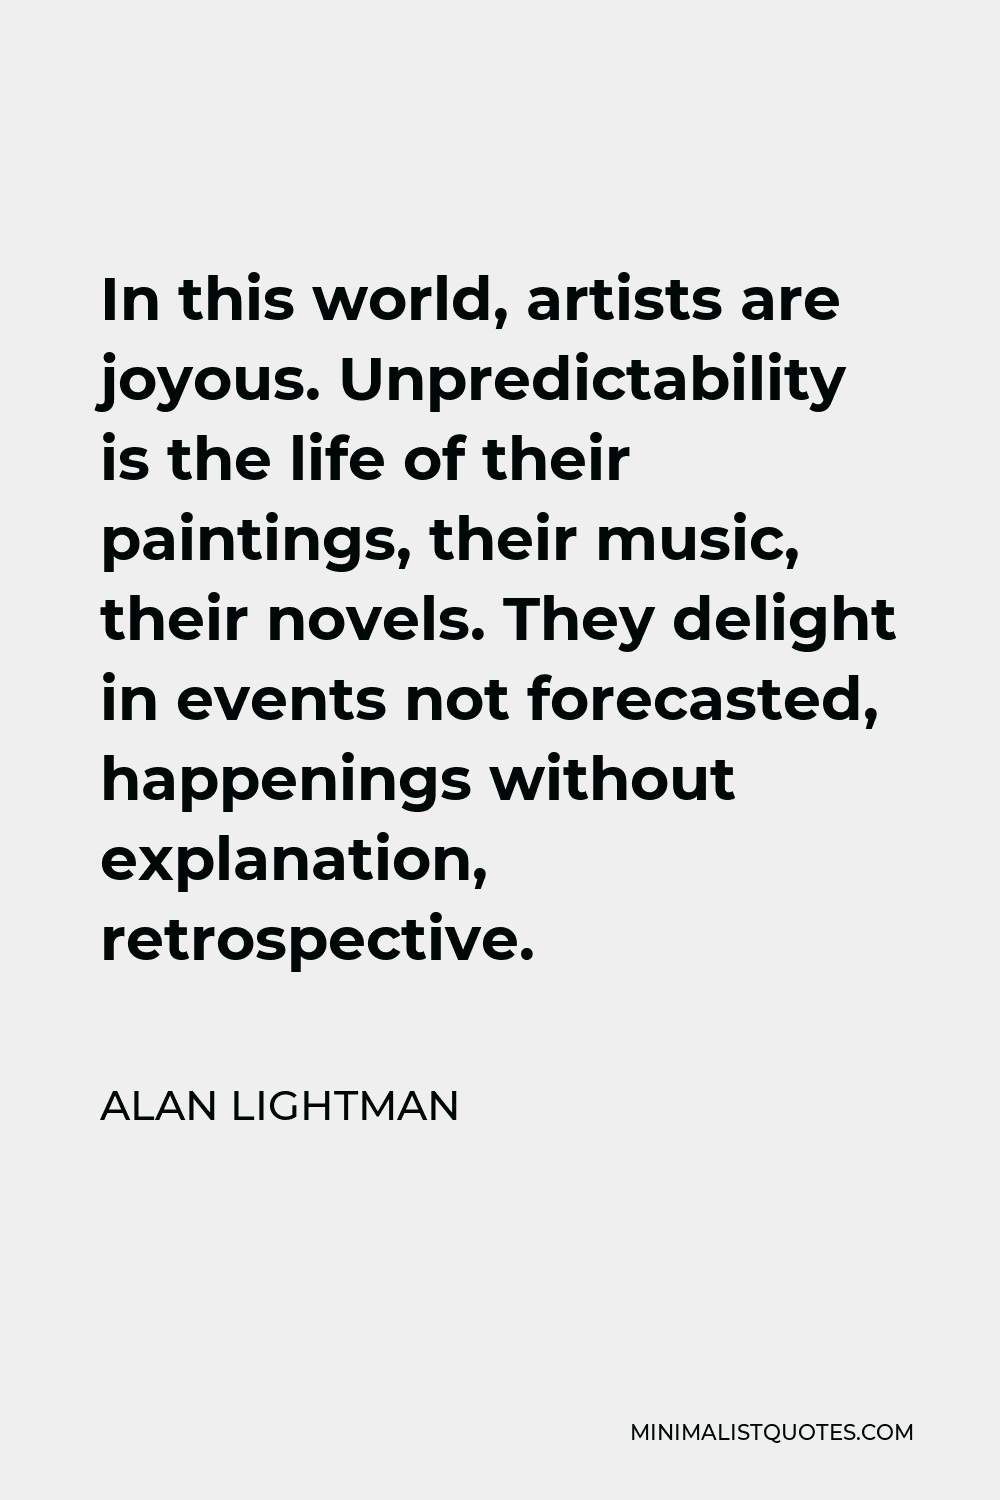 Alan Lightman Quote - In this world, artists are joyous. Unpredictability is the life of their paintings, their music, their novels. They delight in events not forecasted, happenings without explanation, retrospective.